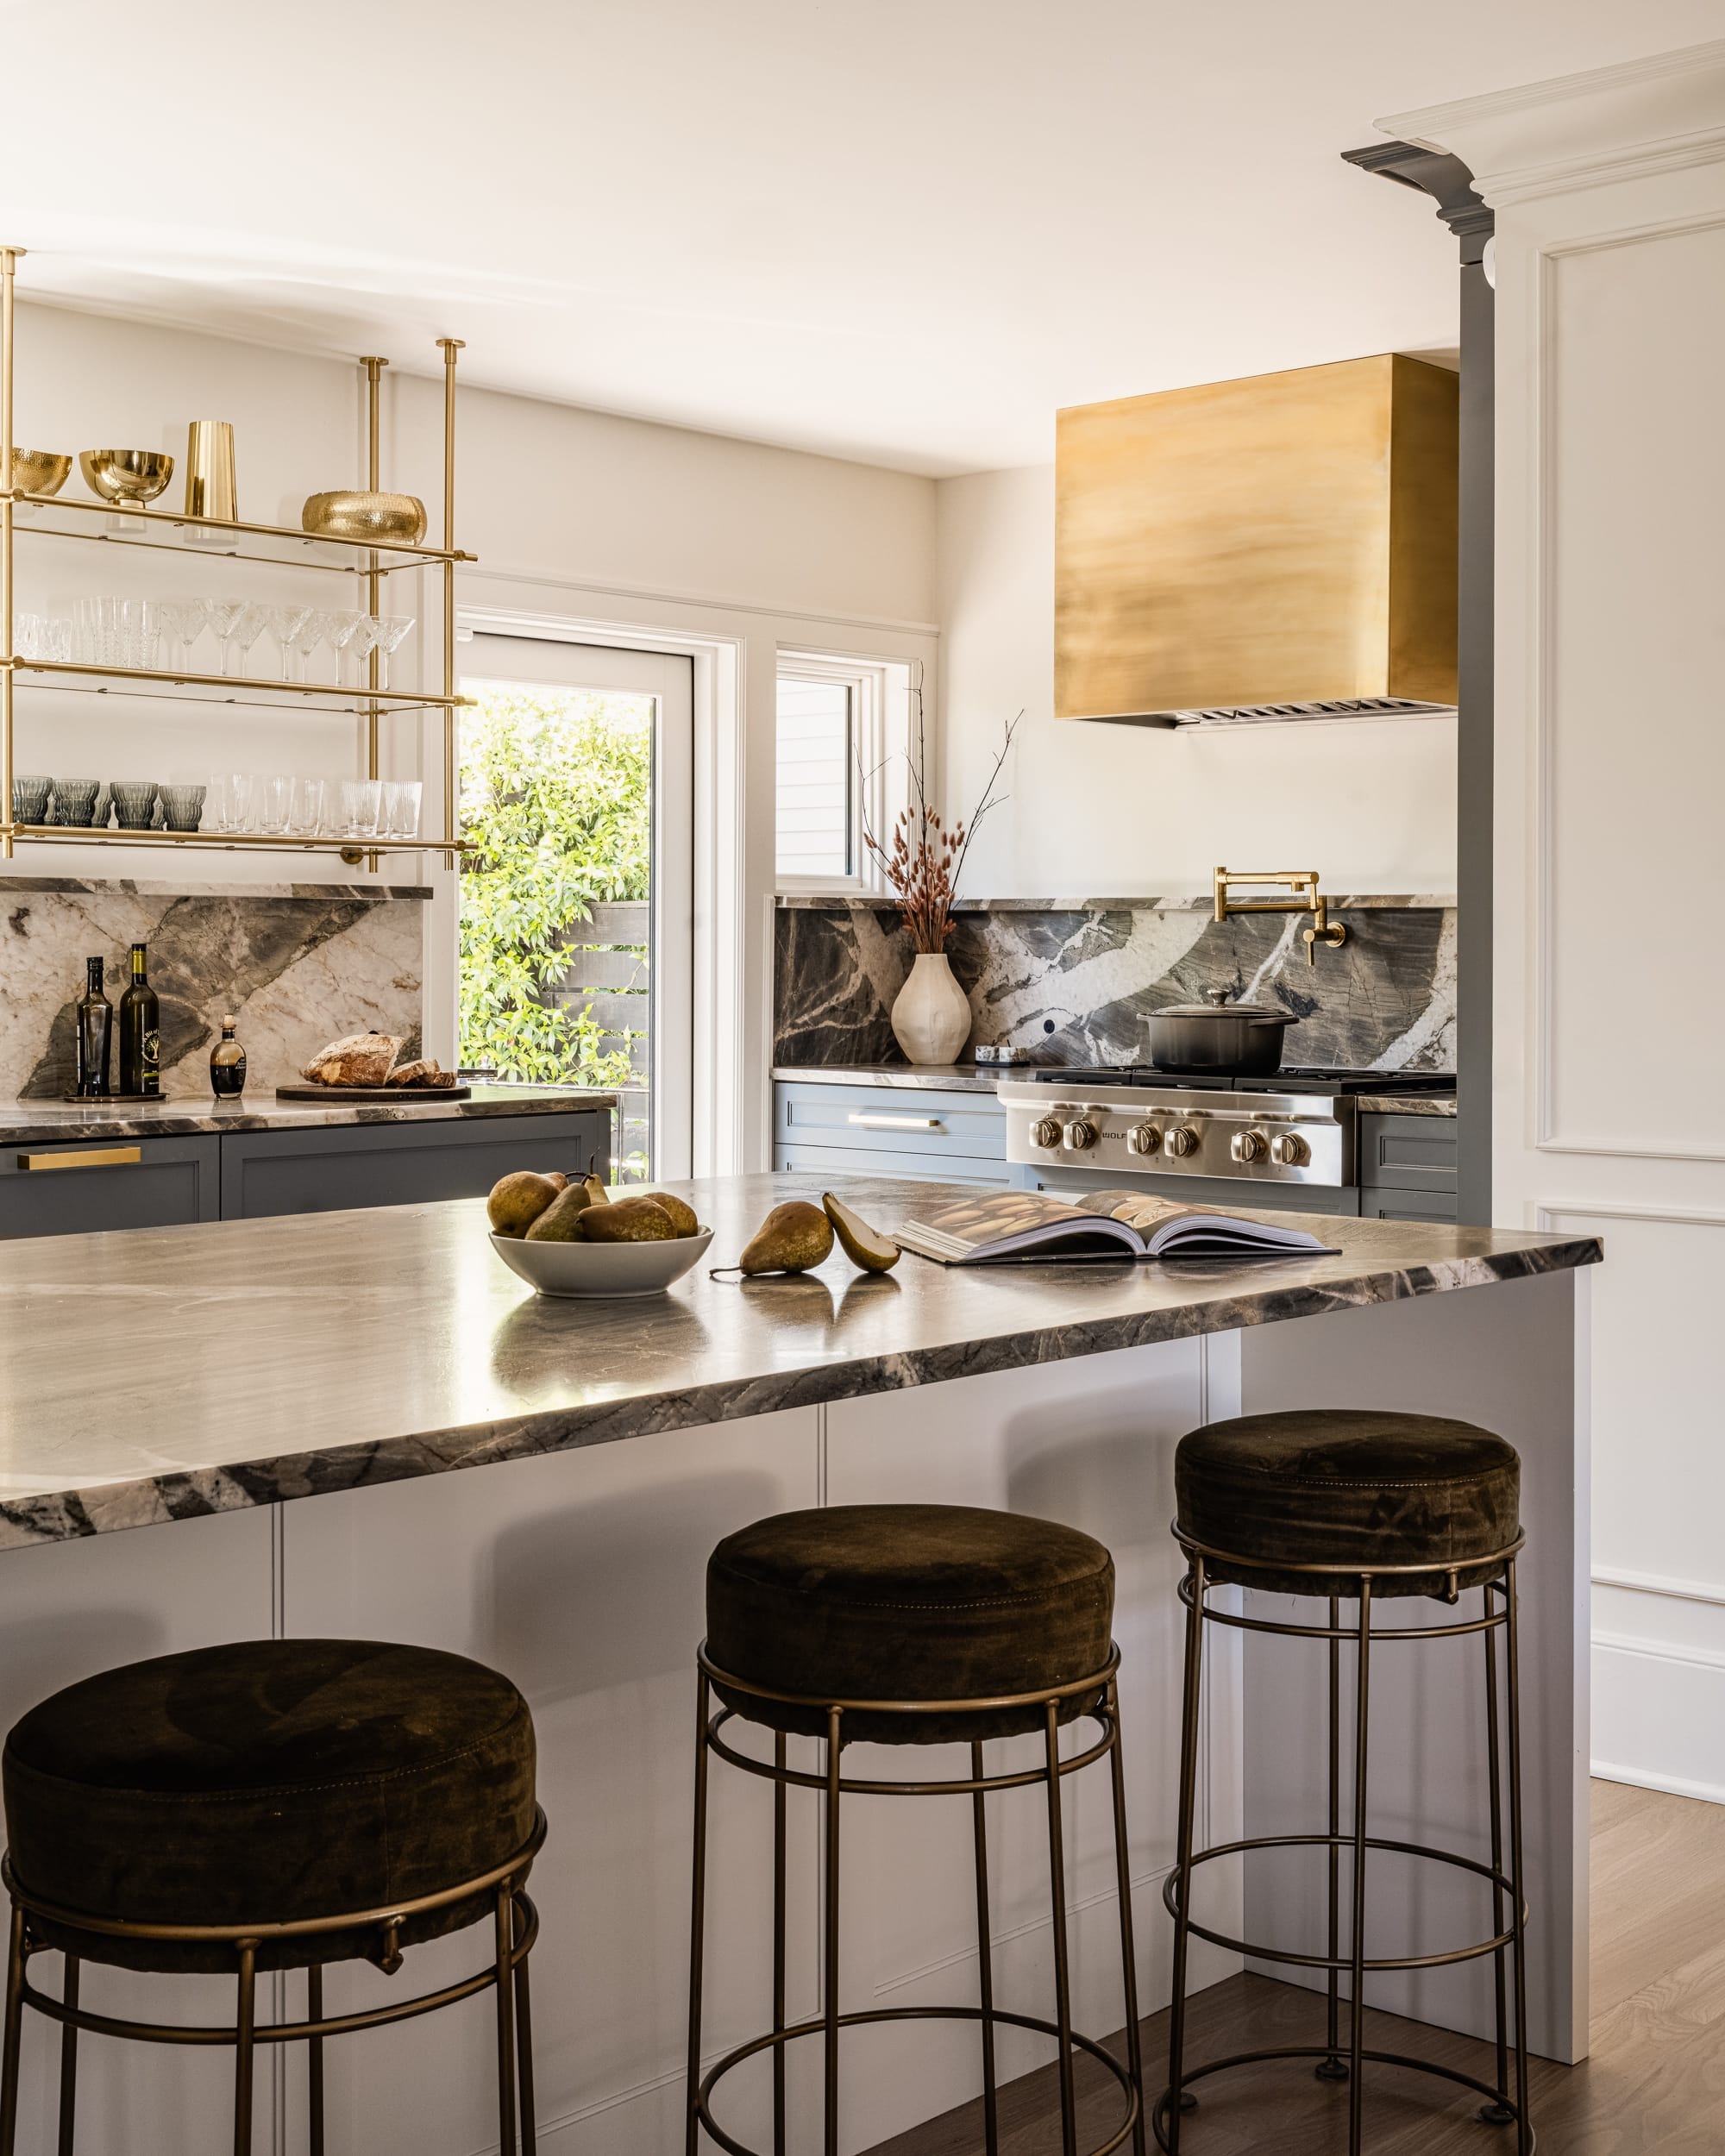 A kitchen with a marble counter top and gold stools.